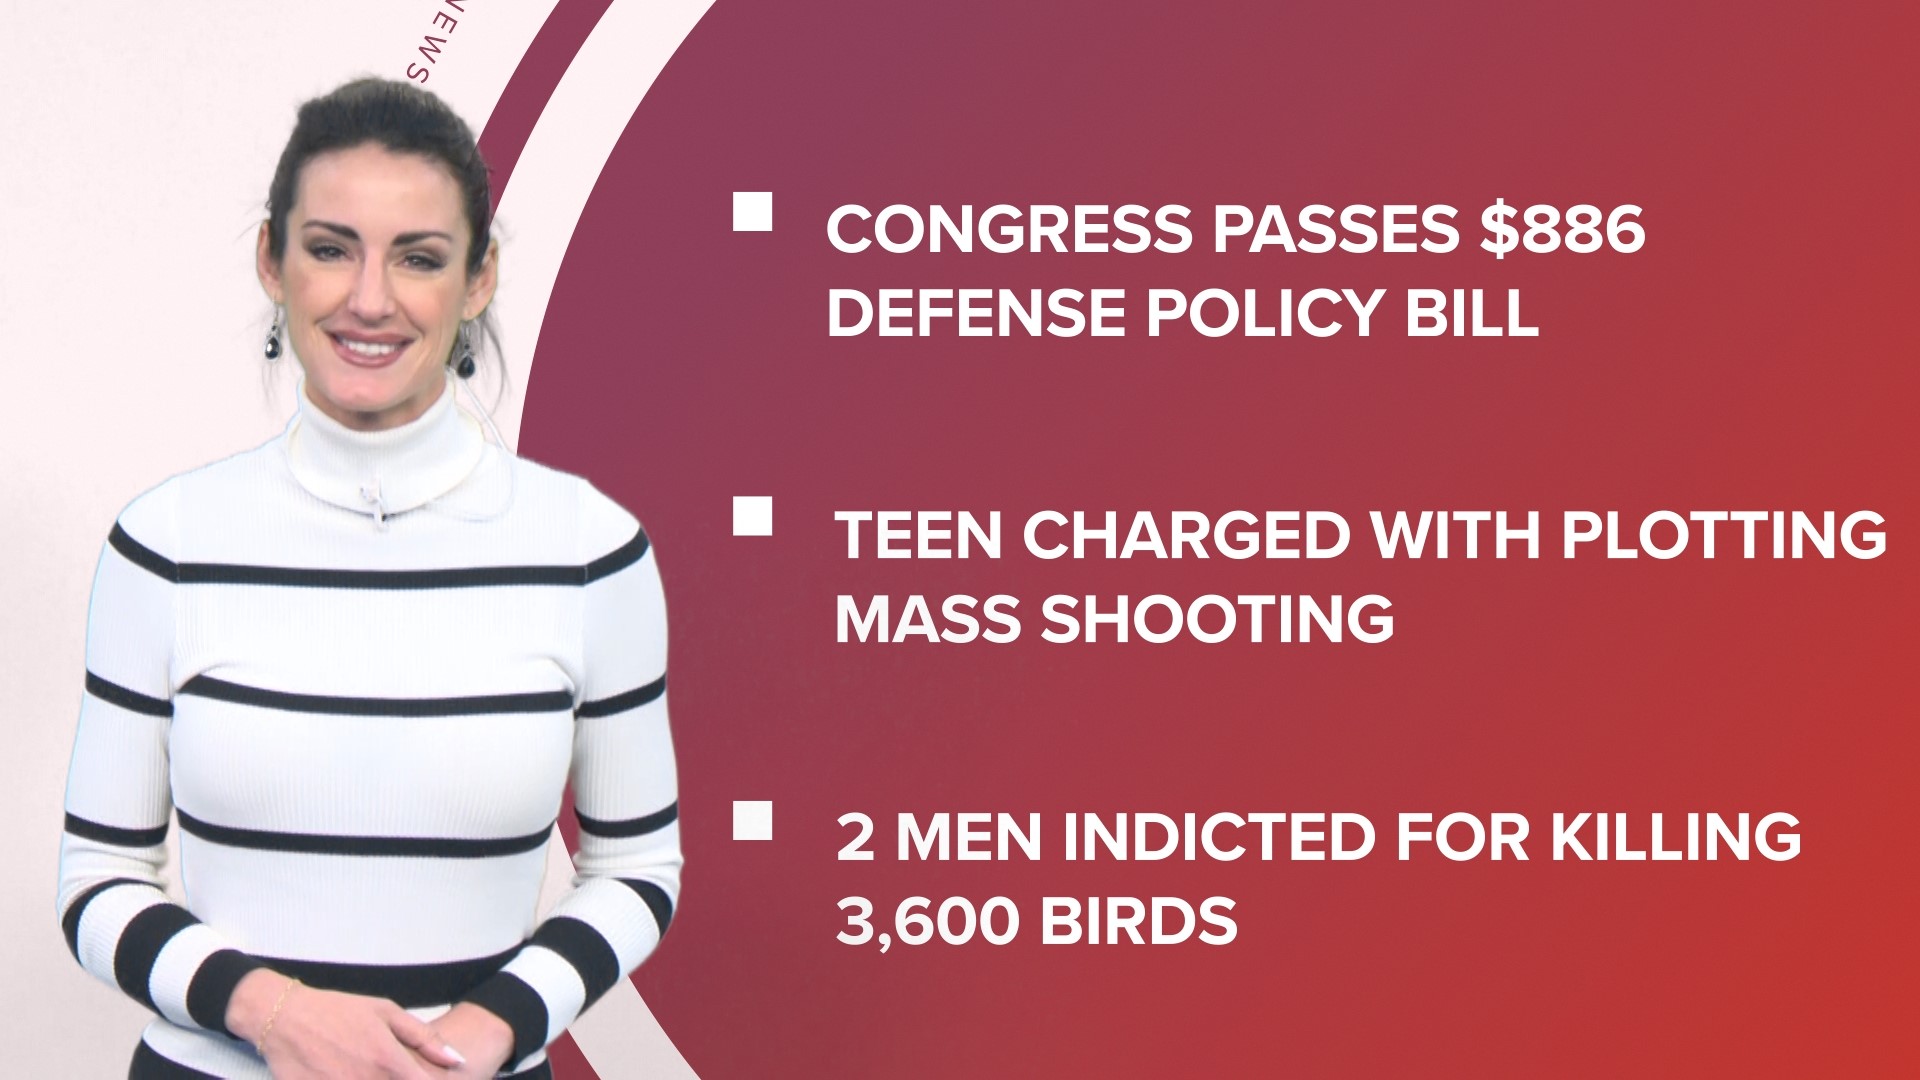 A look at what is happening in the news from Congress passing a defense spending bill to tackling climate issues and Trevor Noah set to host the Grammy Awards.